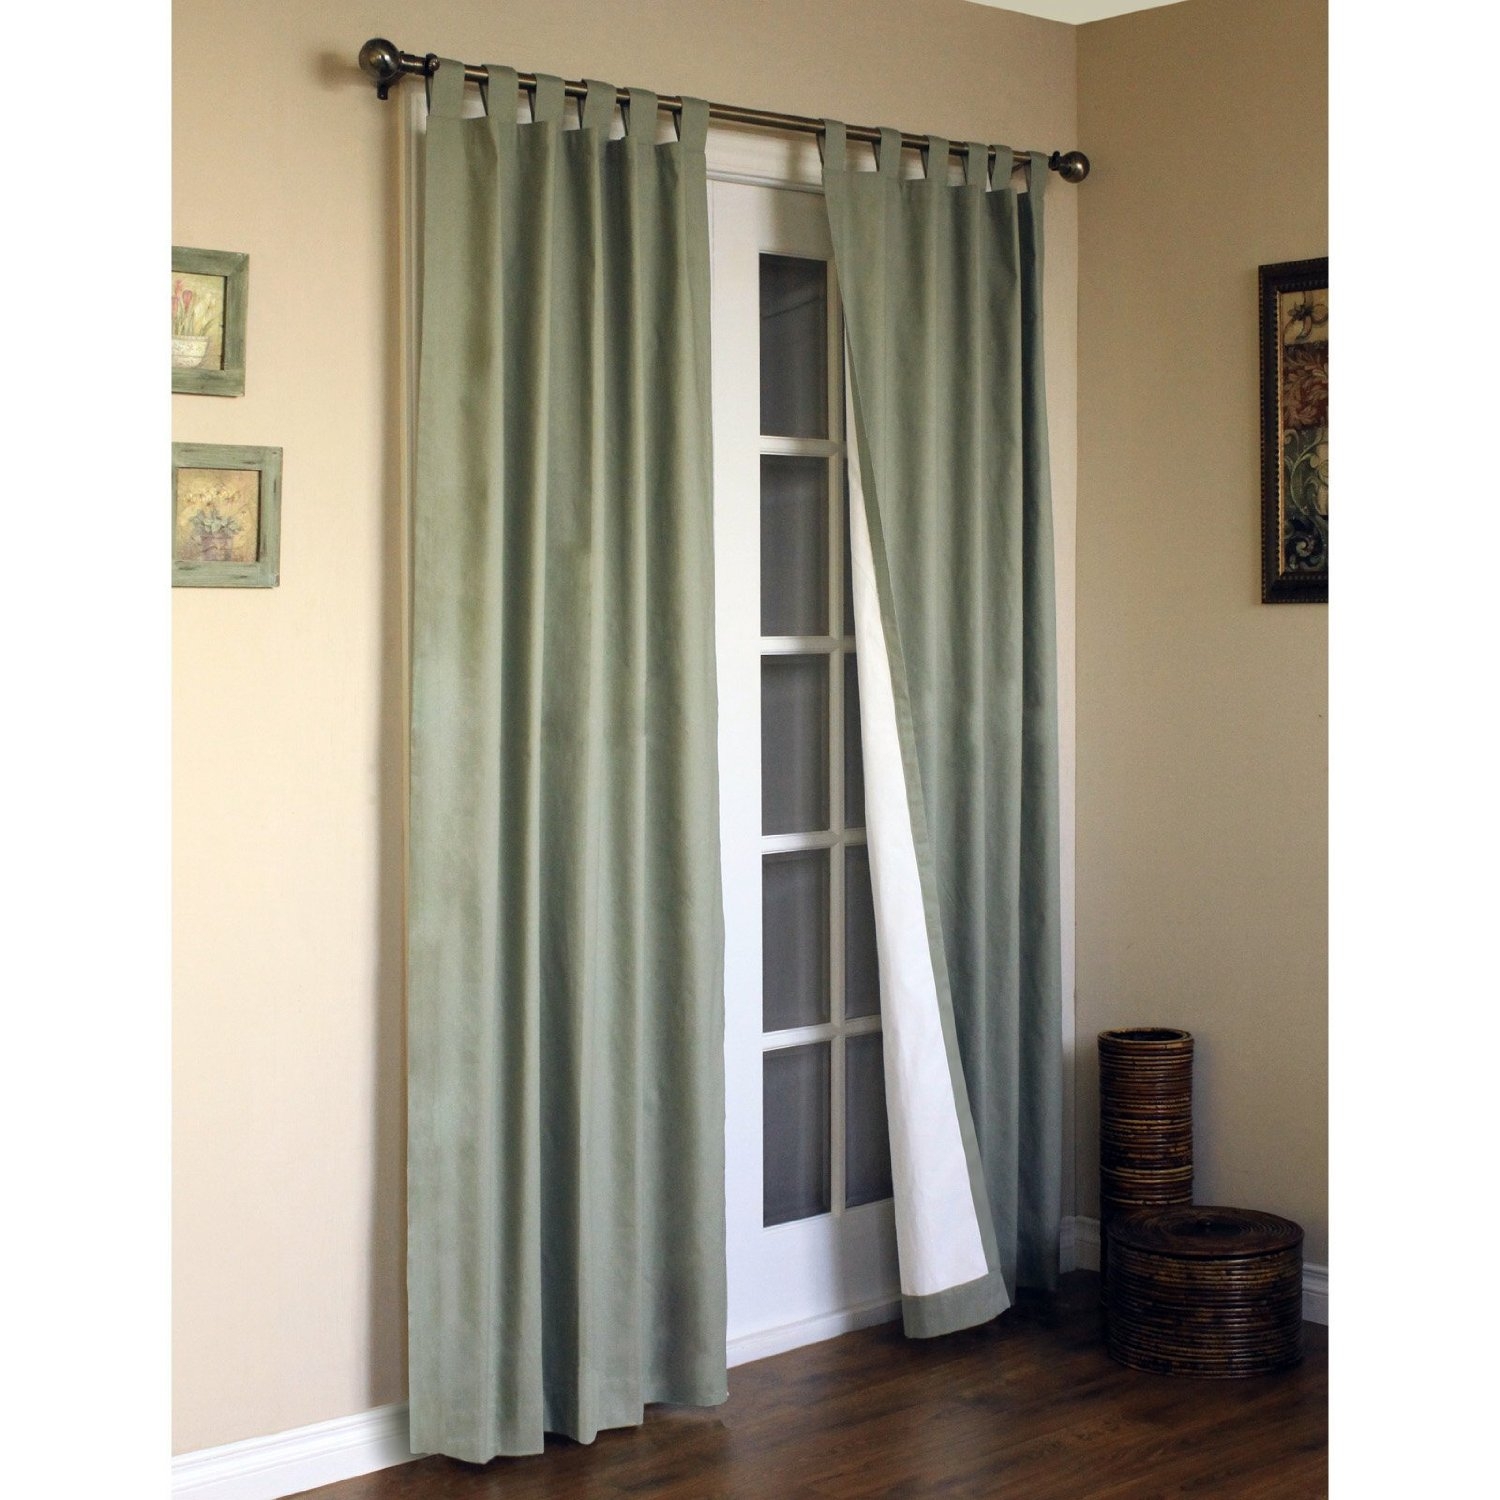 Curtains Sliding Glass Doors Bedroomcurtains for sliding glass doors modernize your sliding glass